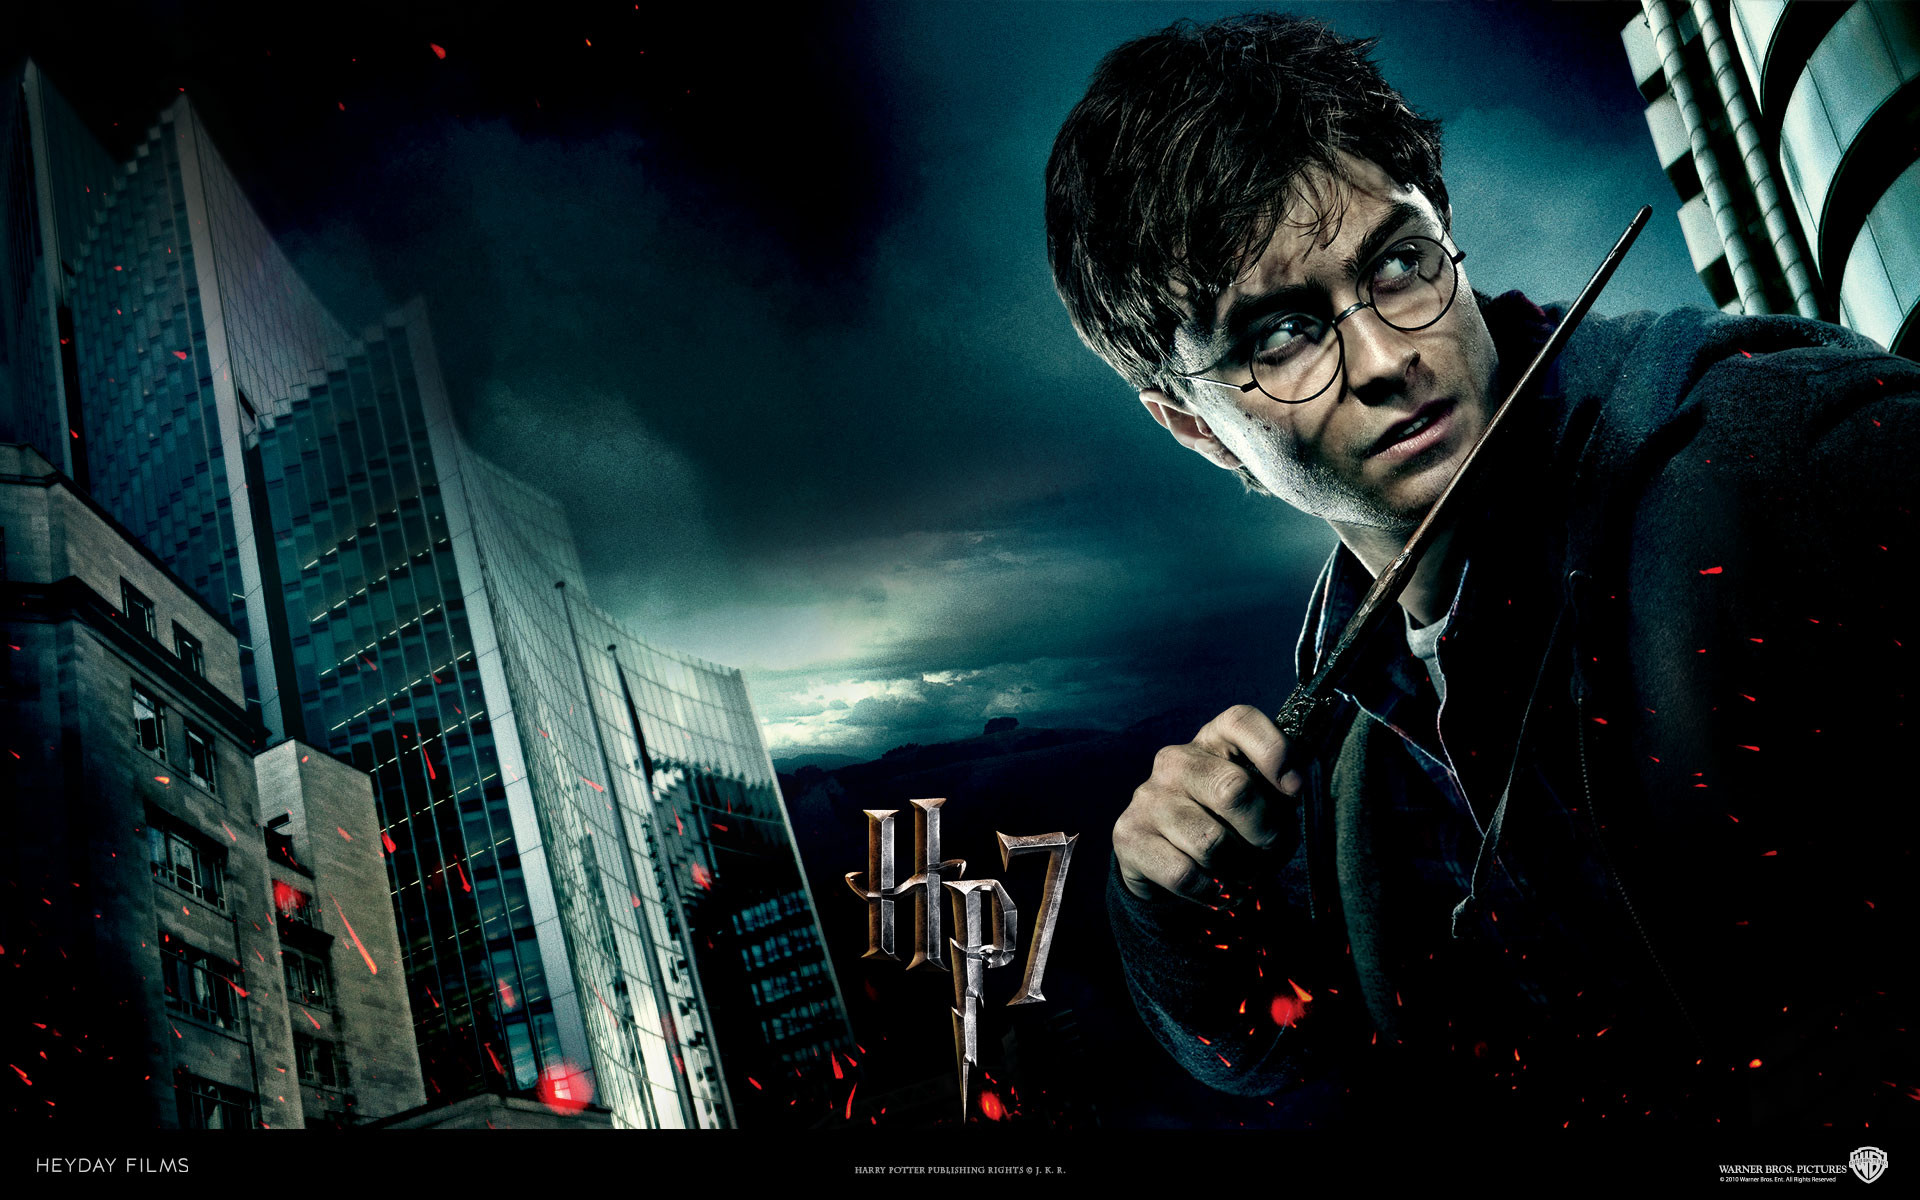 Harry Potter and the Deathly Hallows Wallpapers | HD Wallpapers